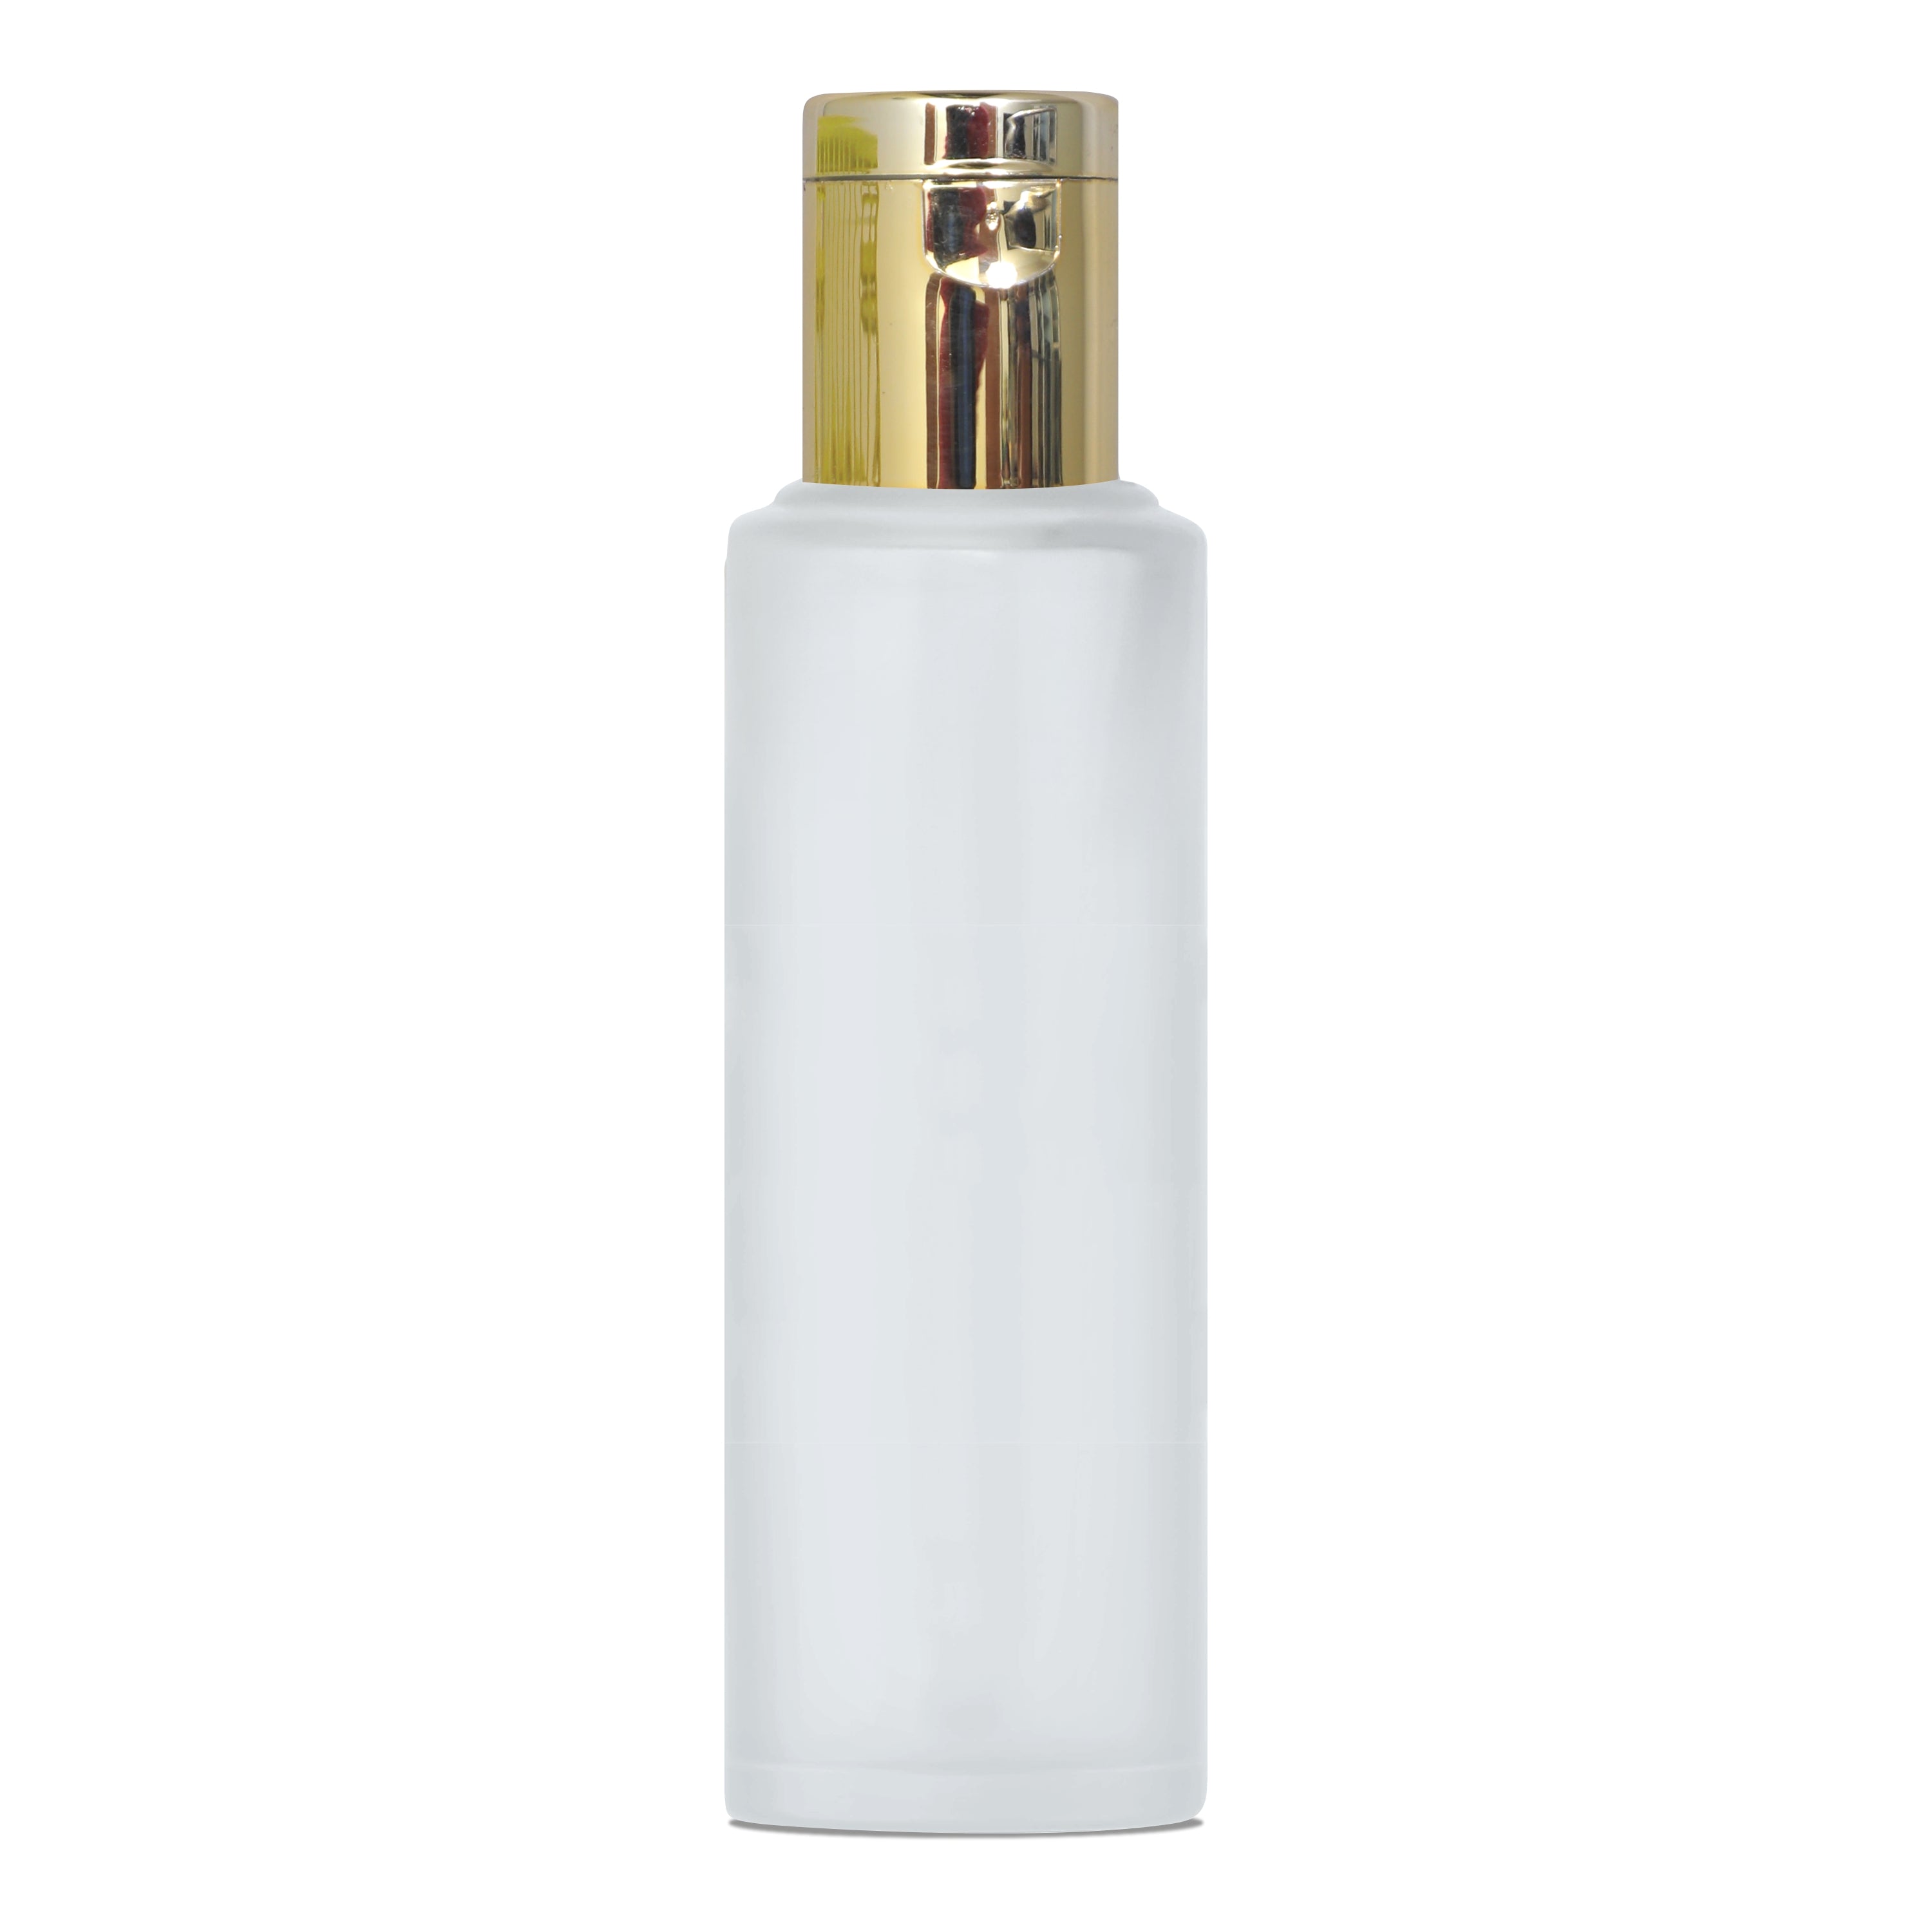 Frosted Glass Bottle With Golden Flip Top Cap [ZMG34] 25ML, 30ml, 50ml, 100ml